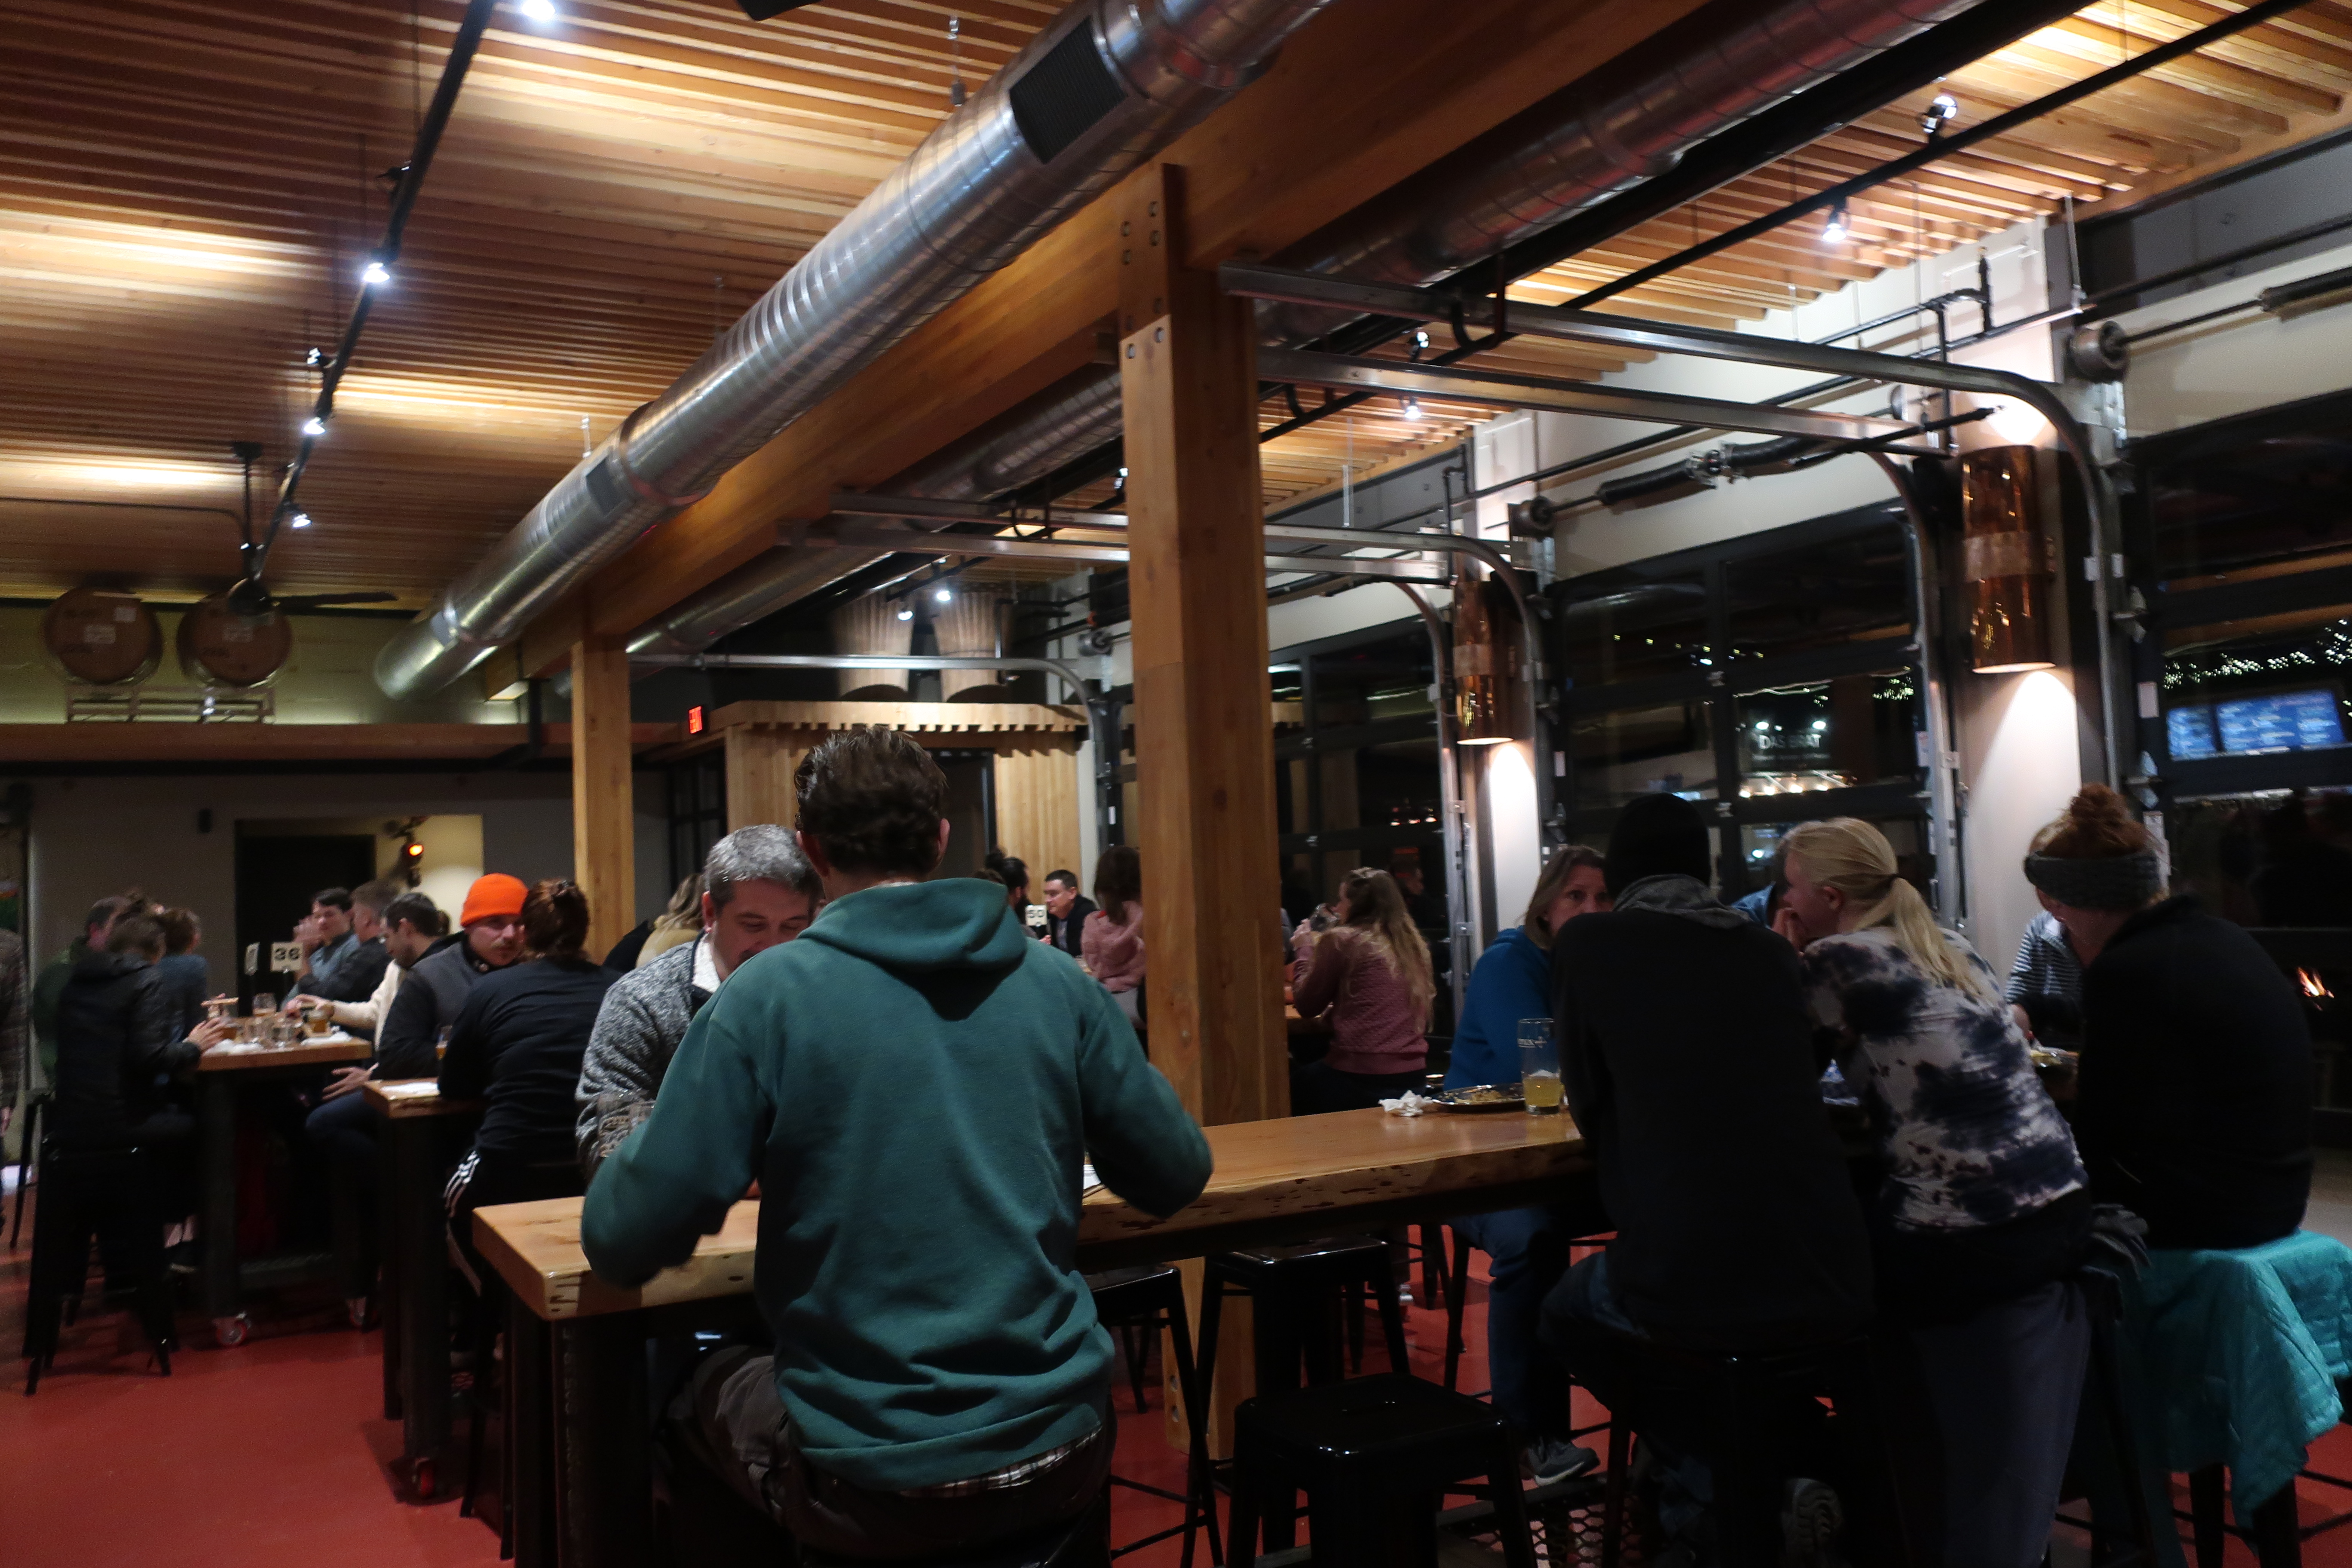 With the expansion at Crux Fermentation Project comes an increasd amount of indoor seating that's located next to some roll up doors for when the weather is pleasant.